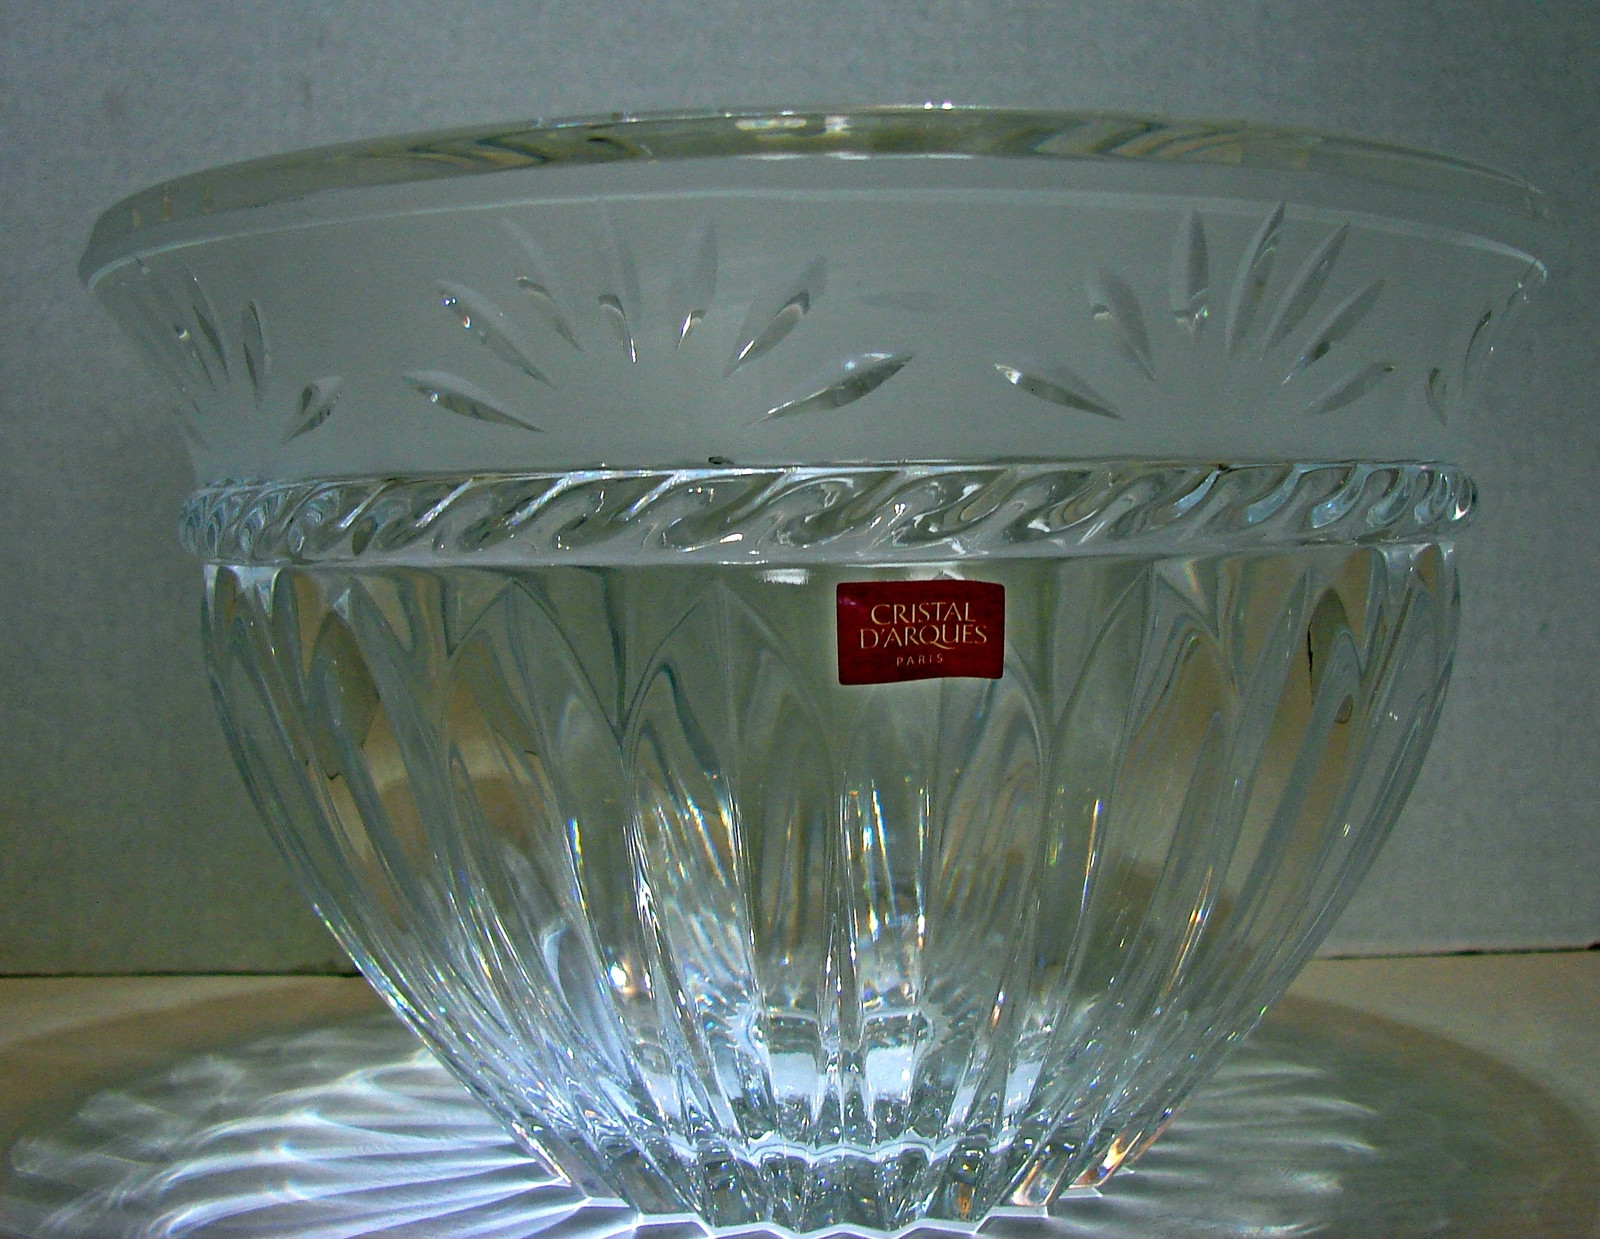 15 Trendy Anna Hutte Bleikristall Lead Crystal Vase 2024 free download anna hutte bleikristall lead crystal vase of cristal d arques carthage crystal bowl 9 and 50 similar items within cristal d arques carthage crystal bowl 9 3 8 diameter